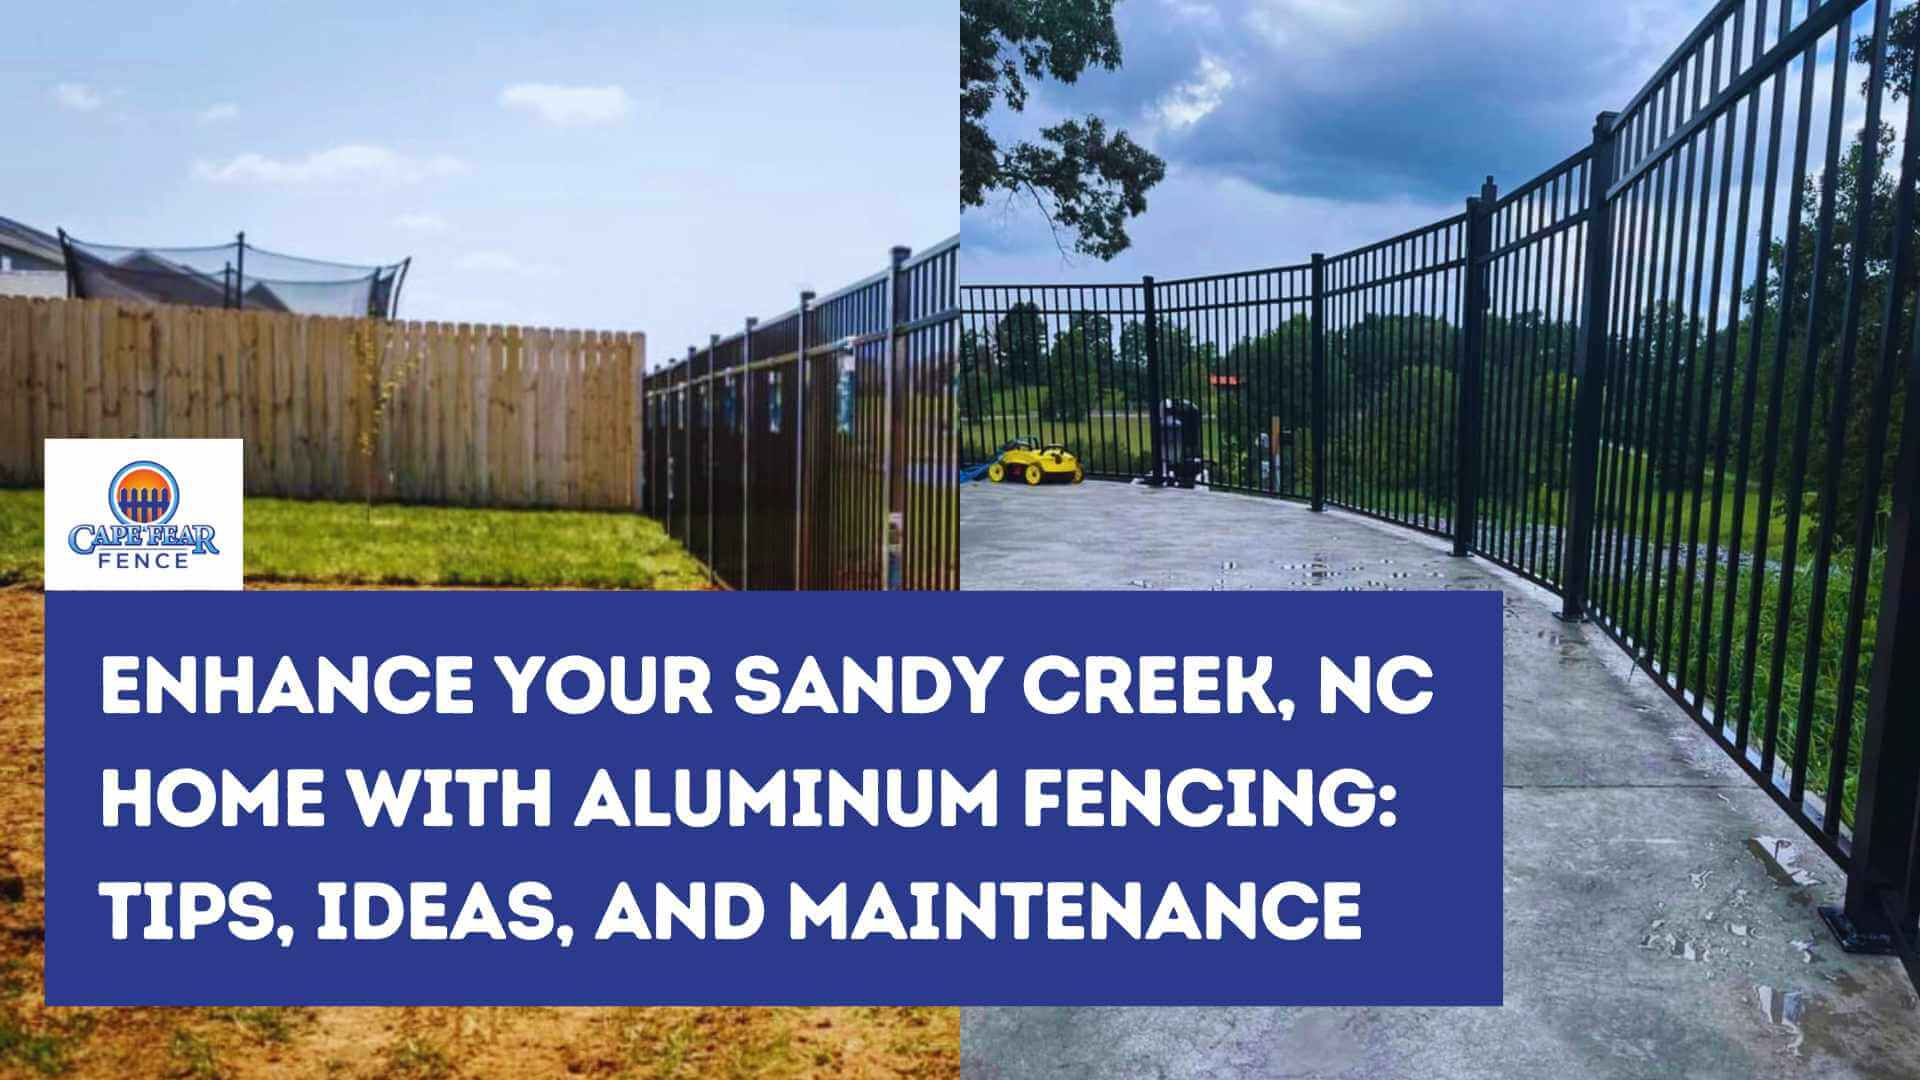 Enhance Your Sandy Creek, NC Home with Aluminum Fencing: Tips, Ideas, and Maintenance